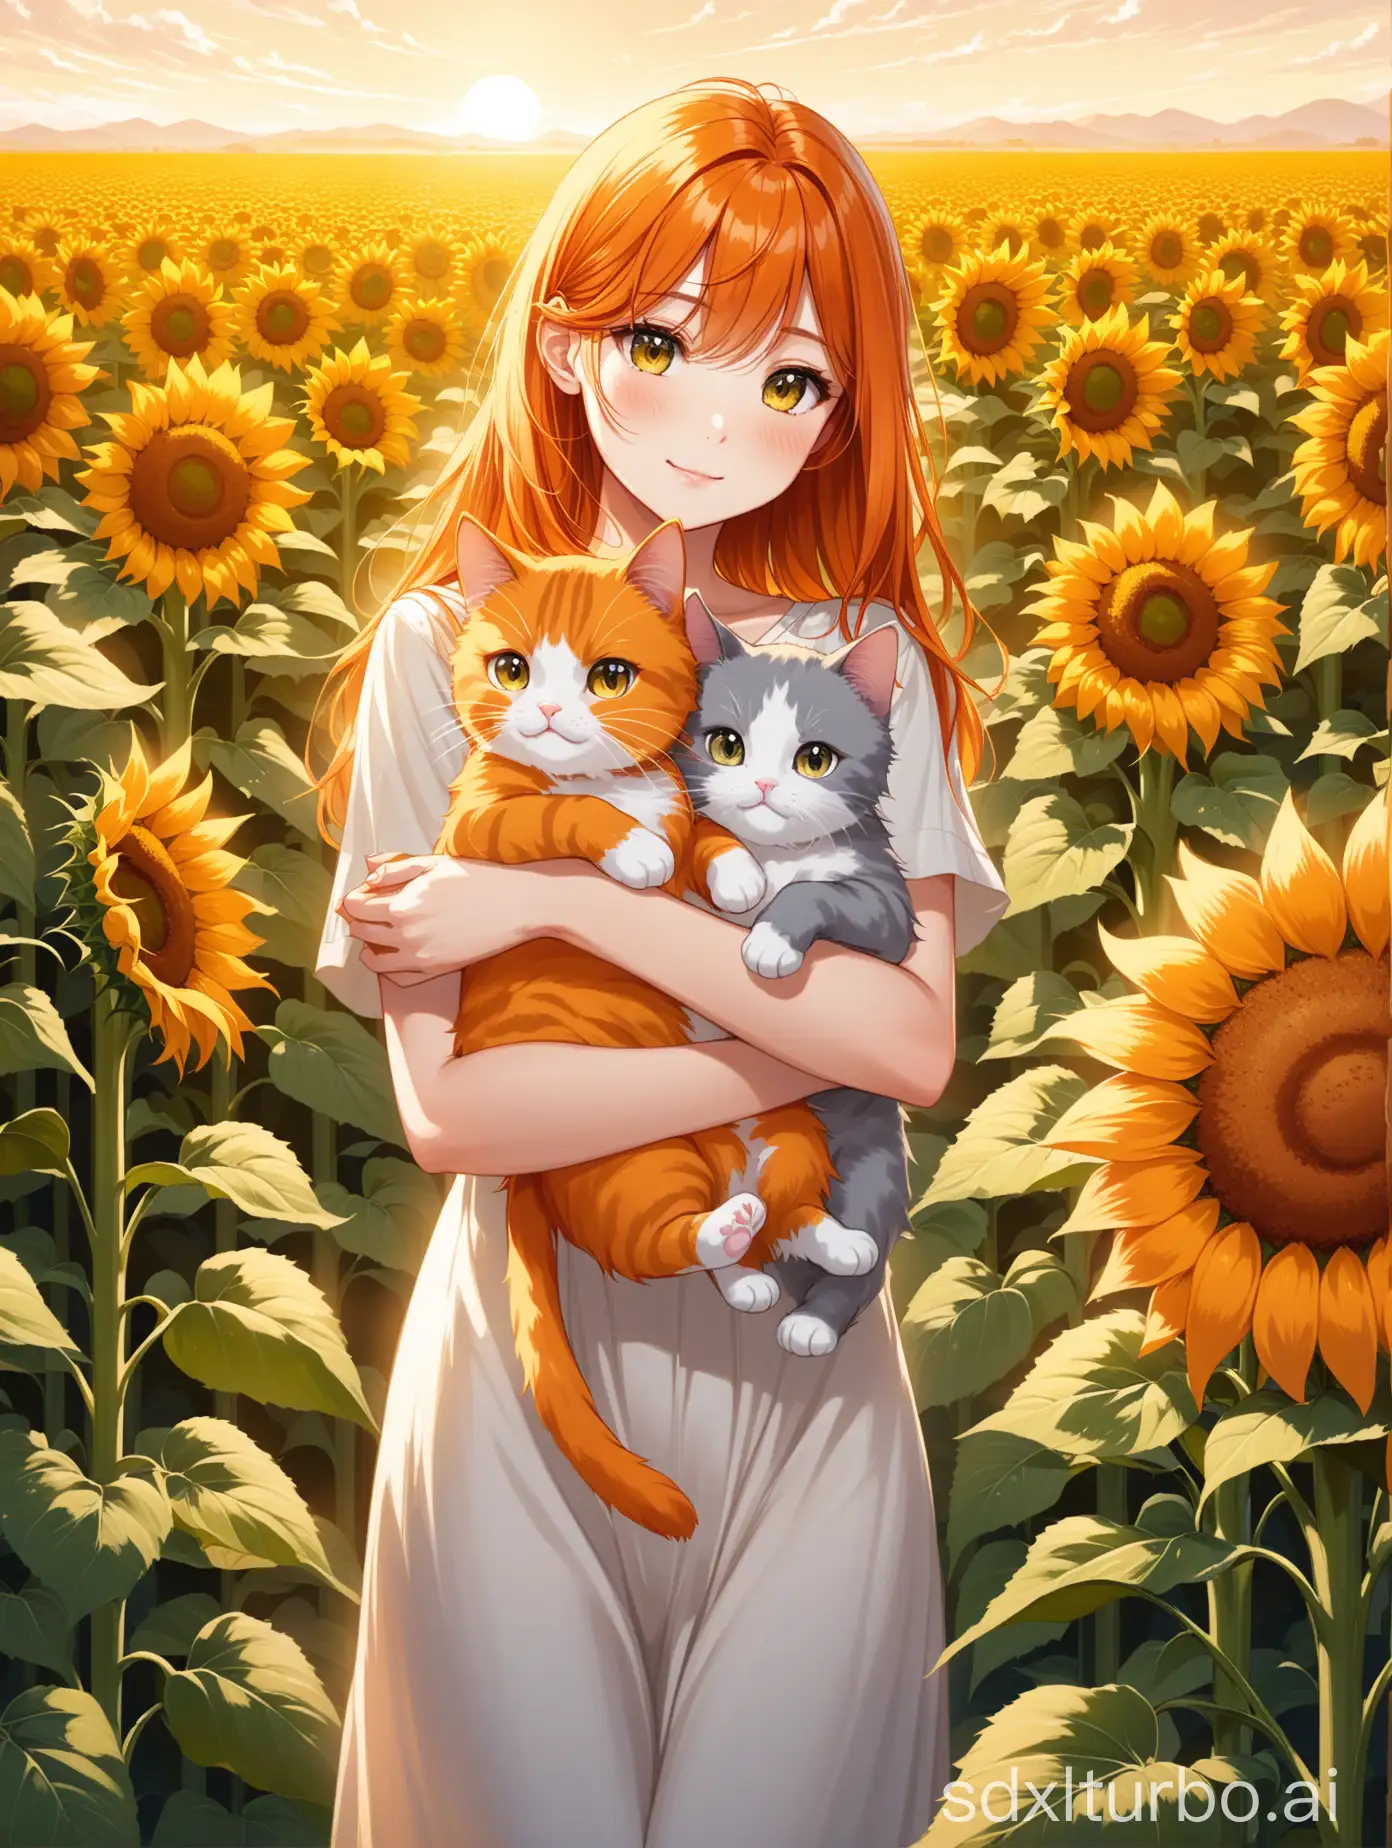 The woman with orange hair, accompanied by a gray calico cat and an orange Garfield cat, plays among the sunflower fields.